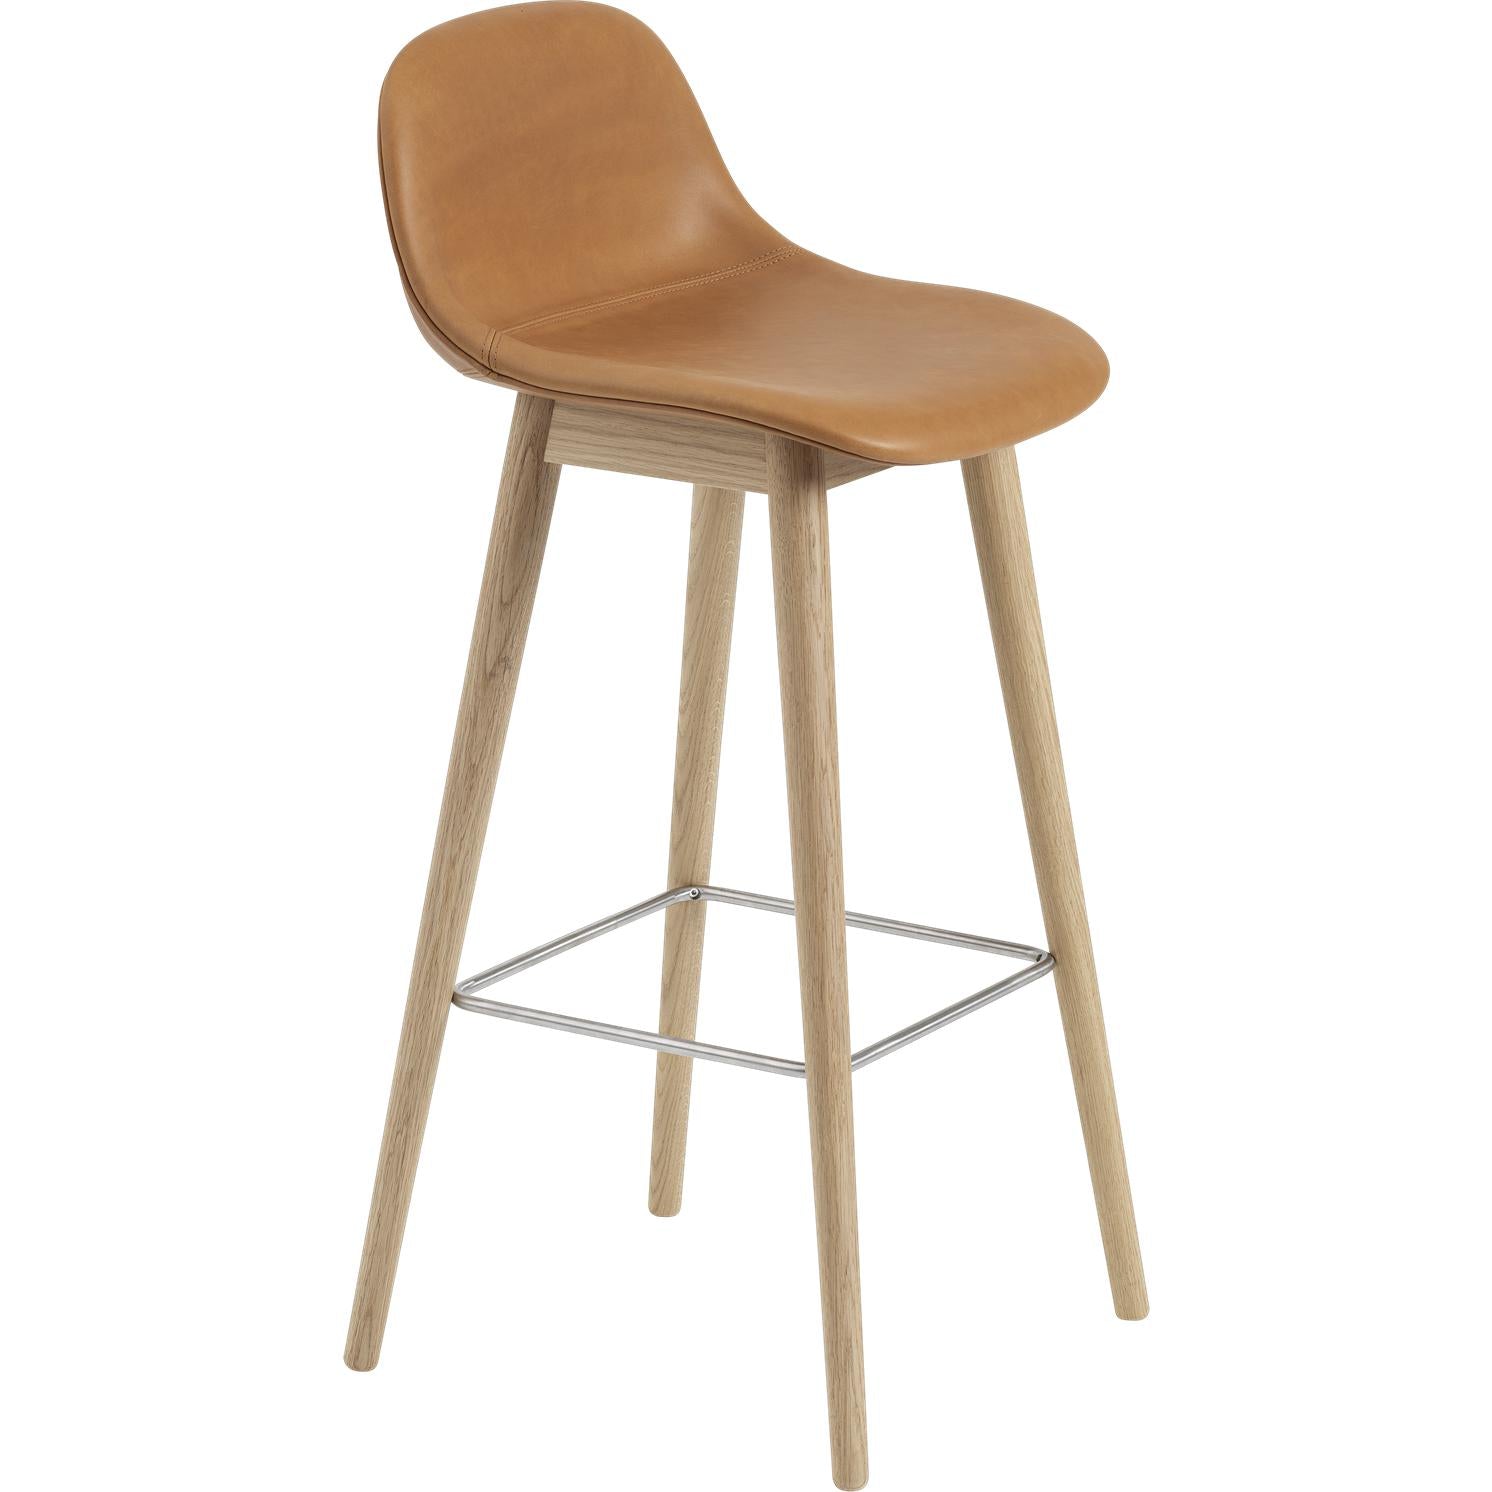 Muuto Fiber Bar Chair With Backrest Wooden Legs, Fiber/Leather Seat, Brown Cognac Leather